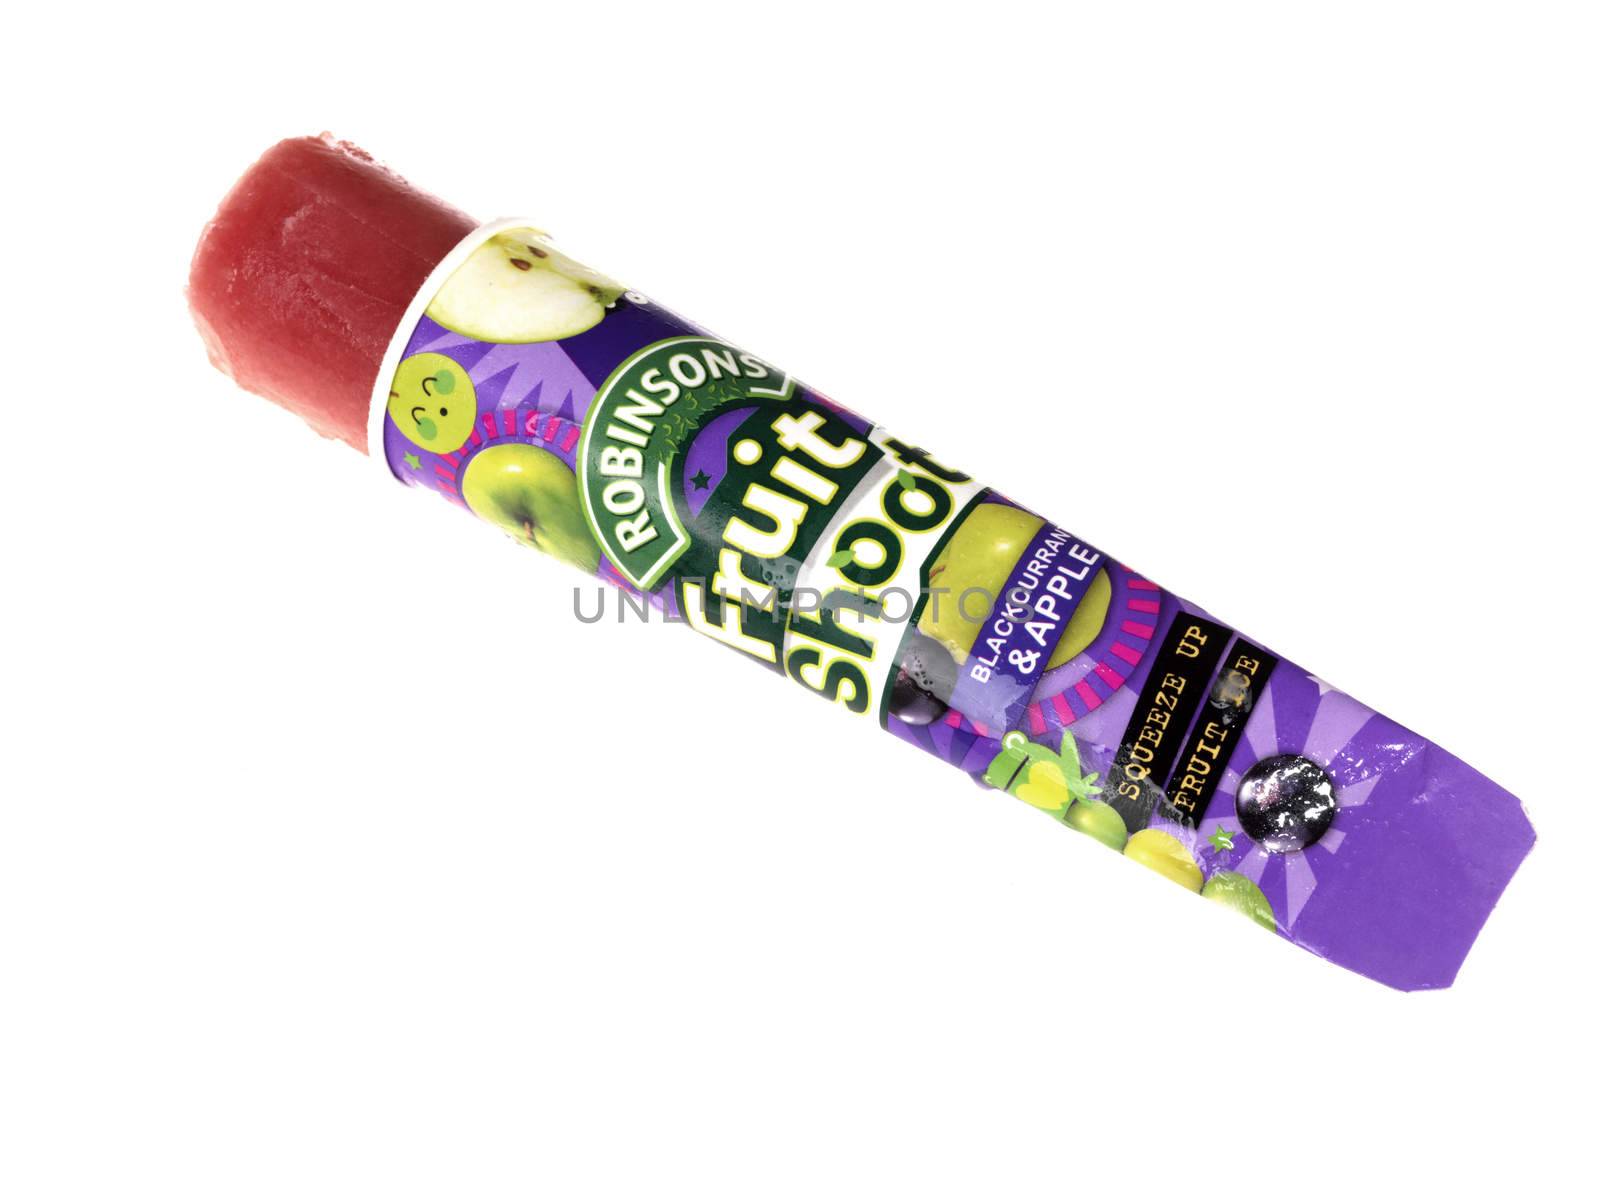 Fruit Shoot Ice Lolly